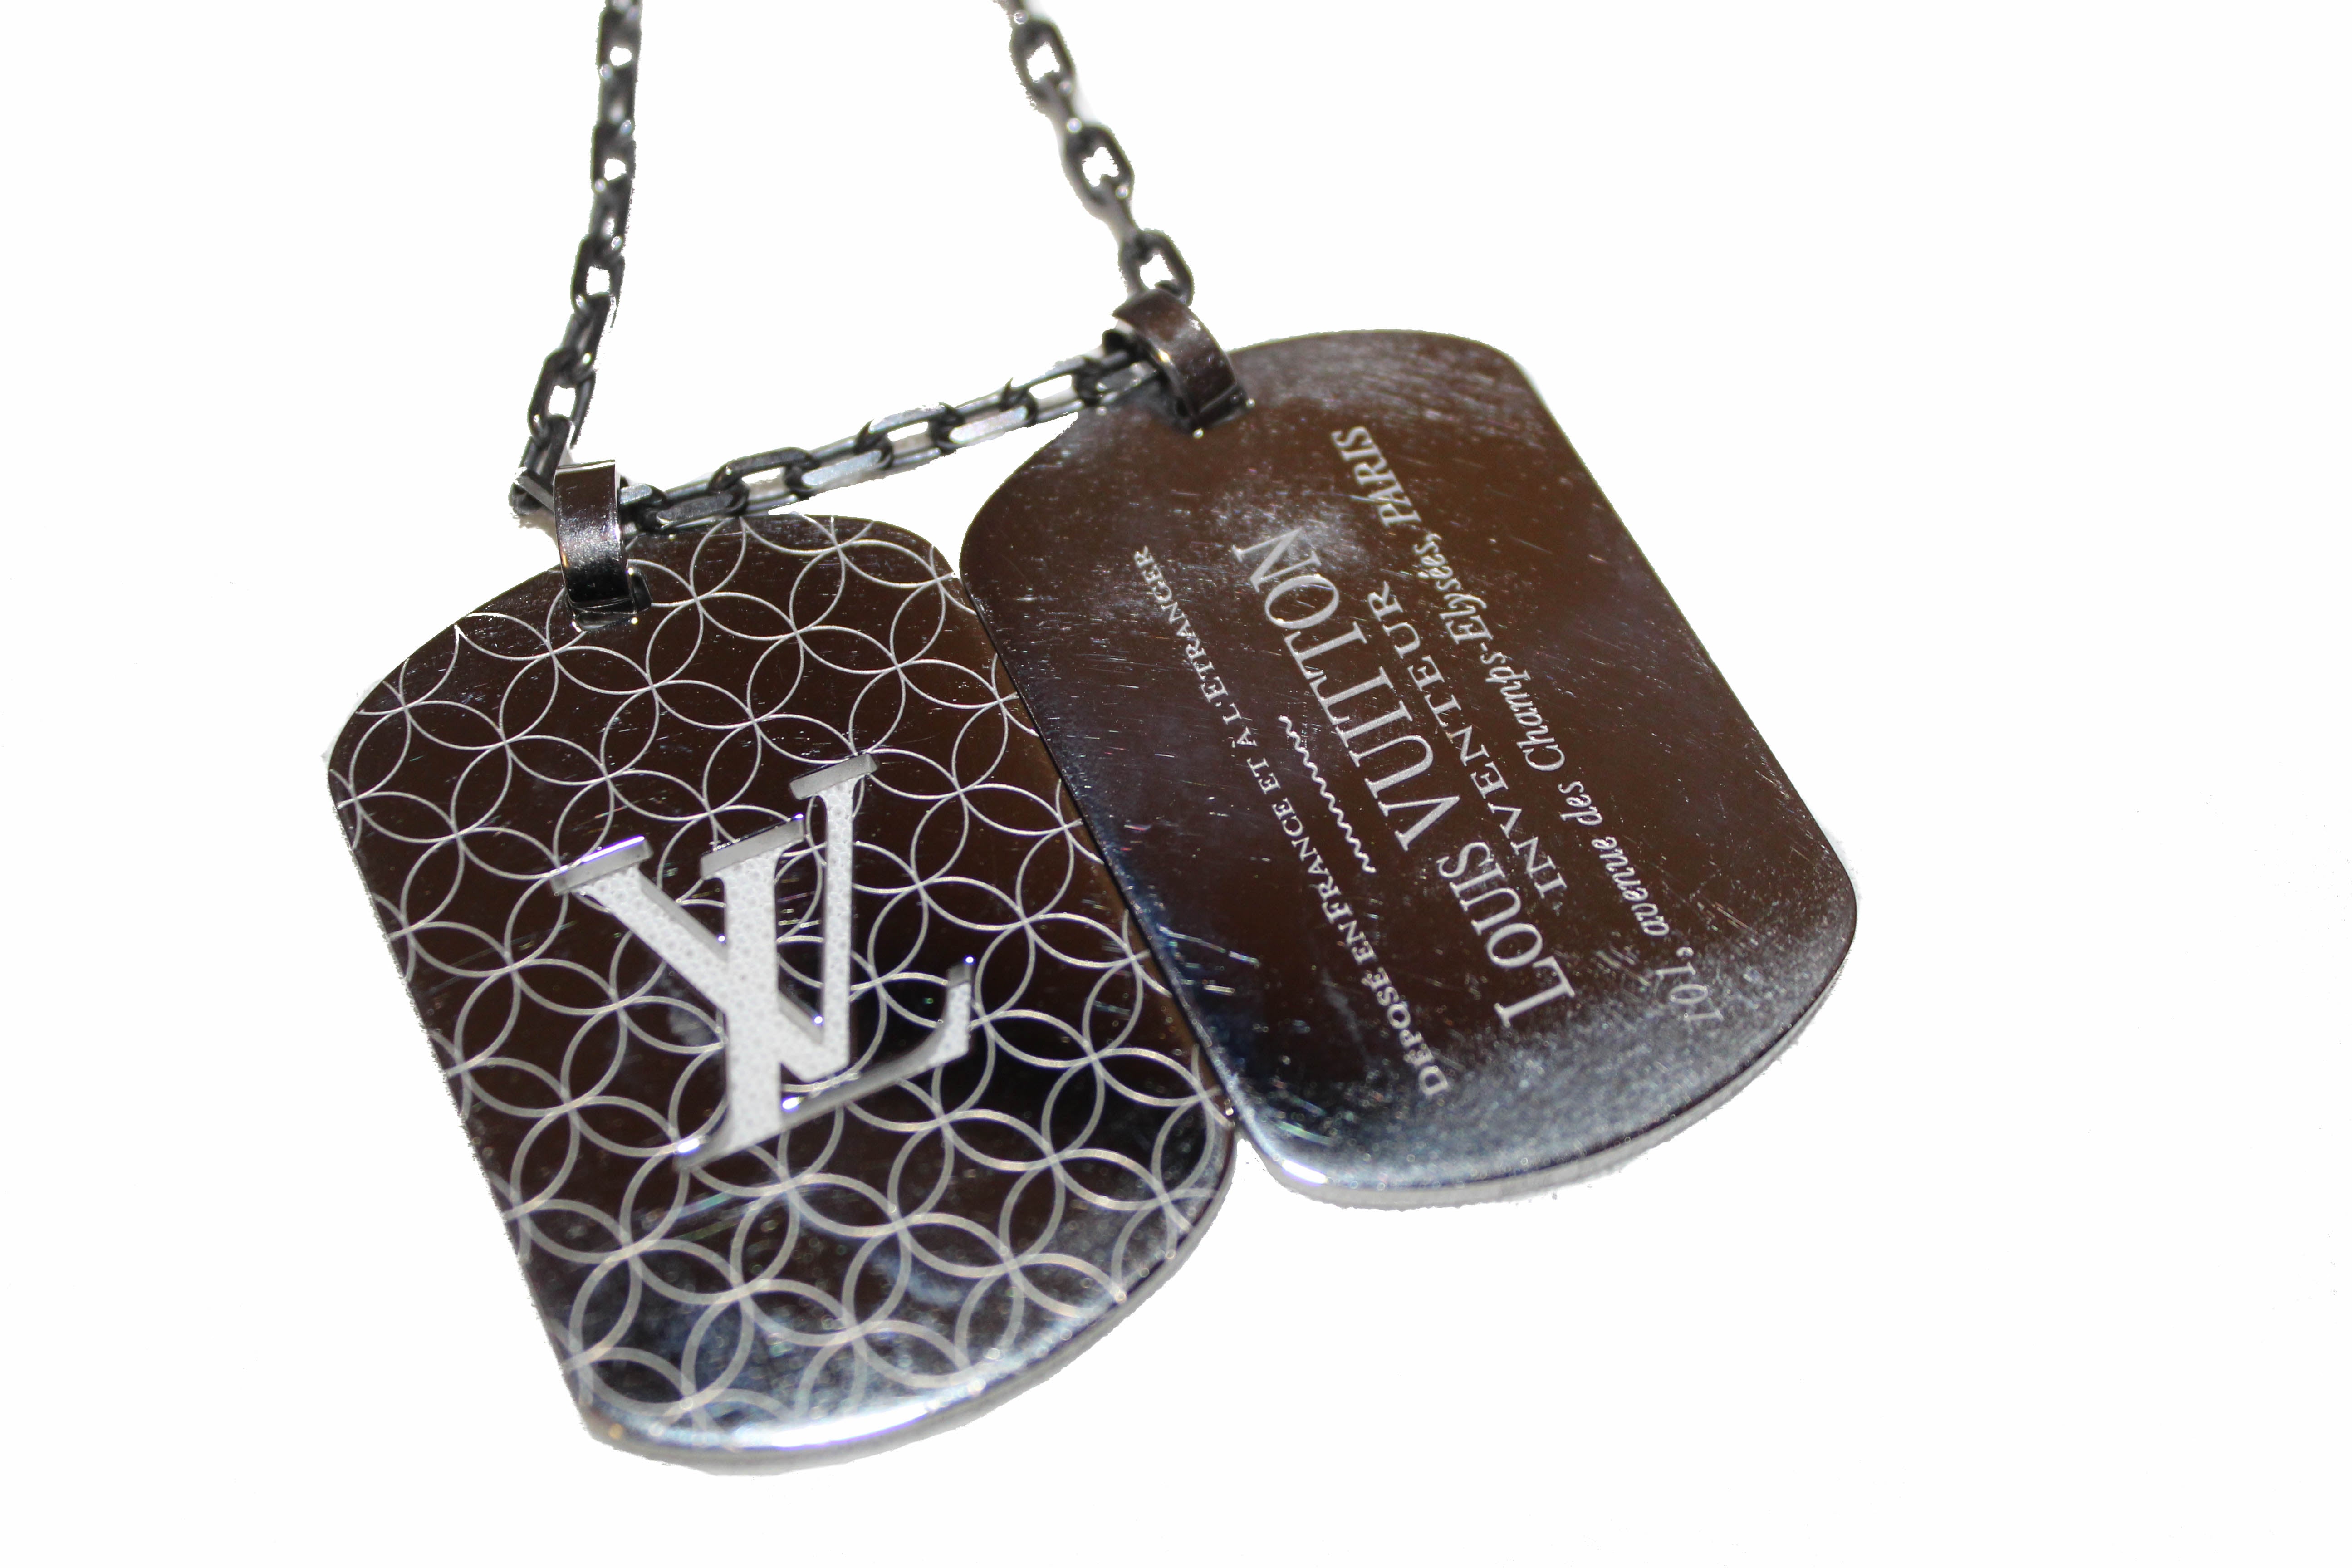 SOLD OUT Rework Vintage Louis Vuitton White LV Necklace – Relic the Label